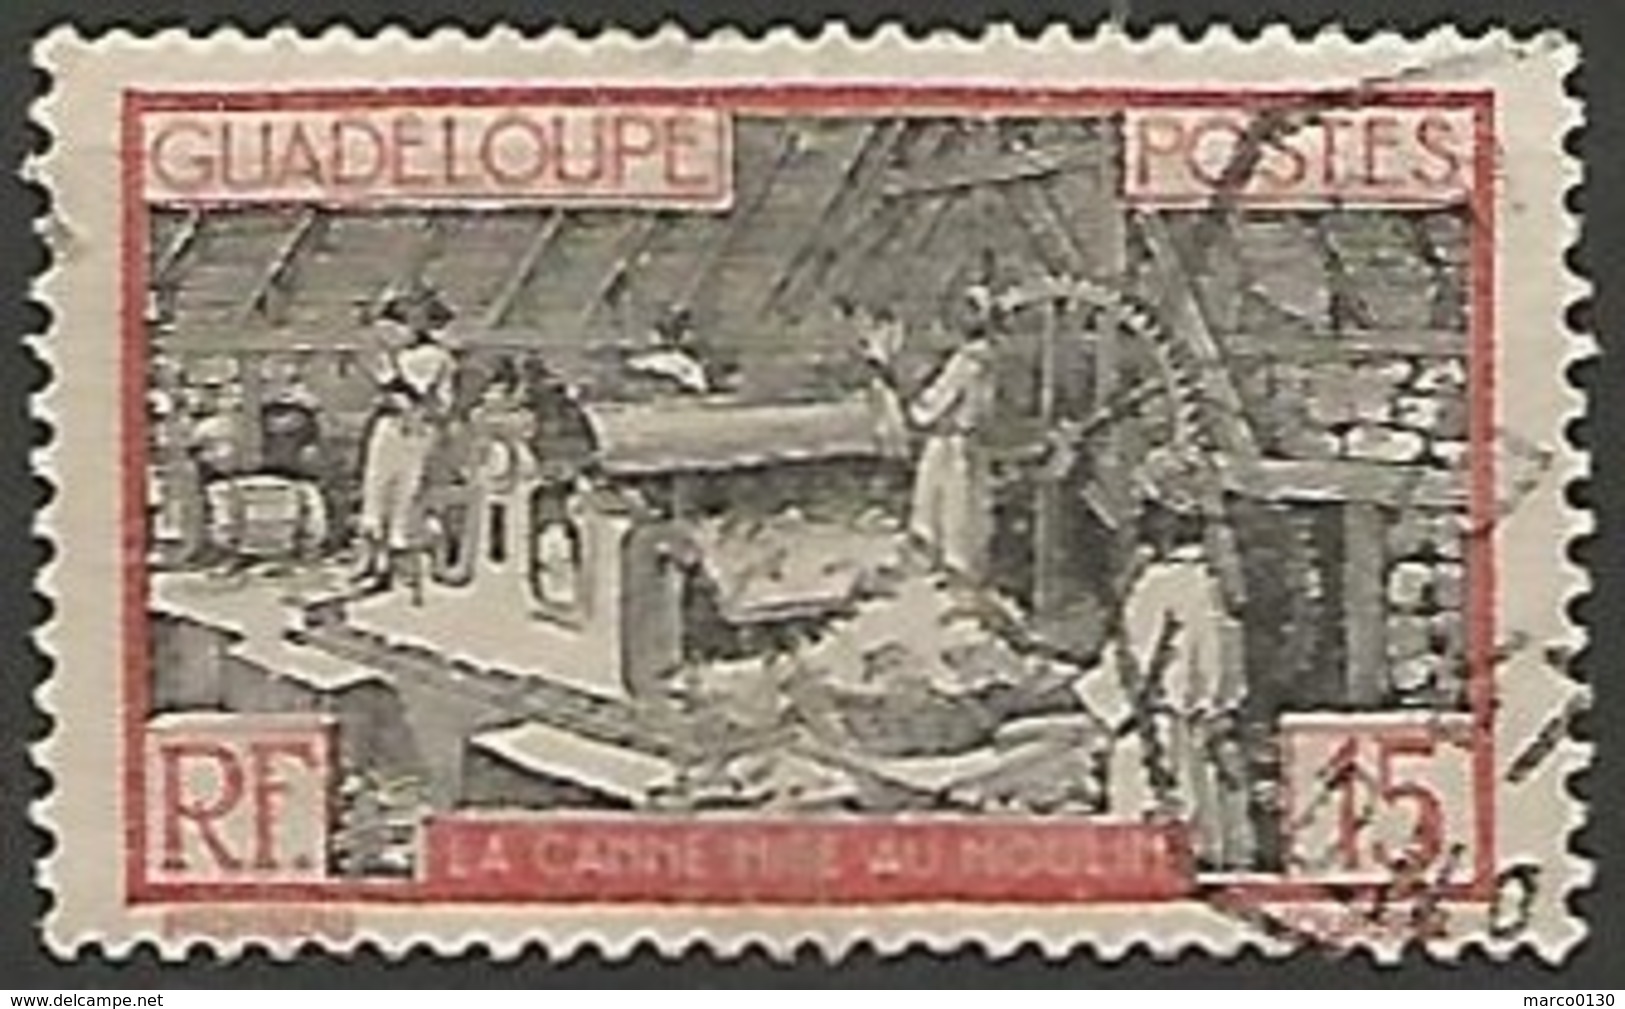 GUADELOUPE N° 104 OBLITERE - Used Stamps